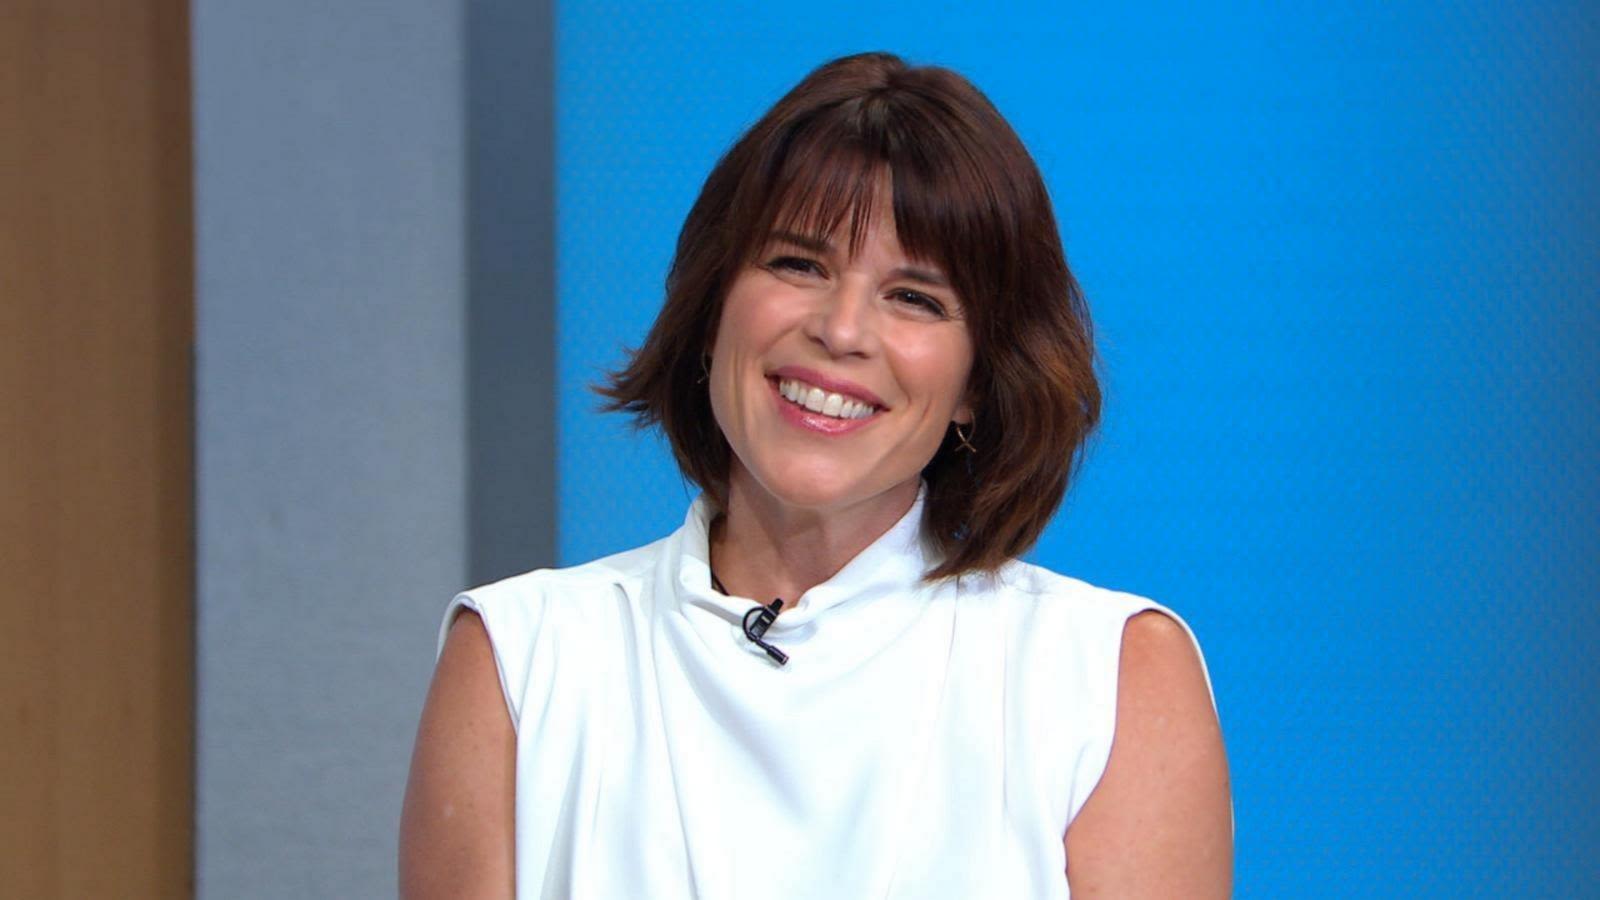 Neve Campbell says she's 'really excited' to return for 'Scream 7'